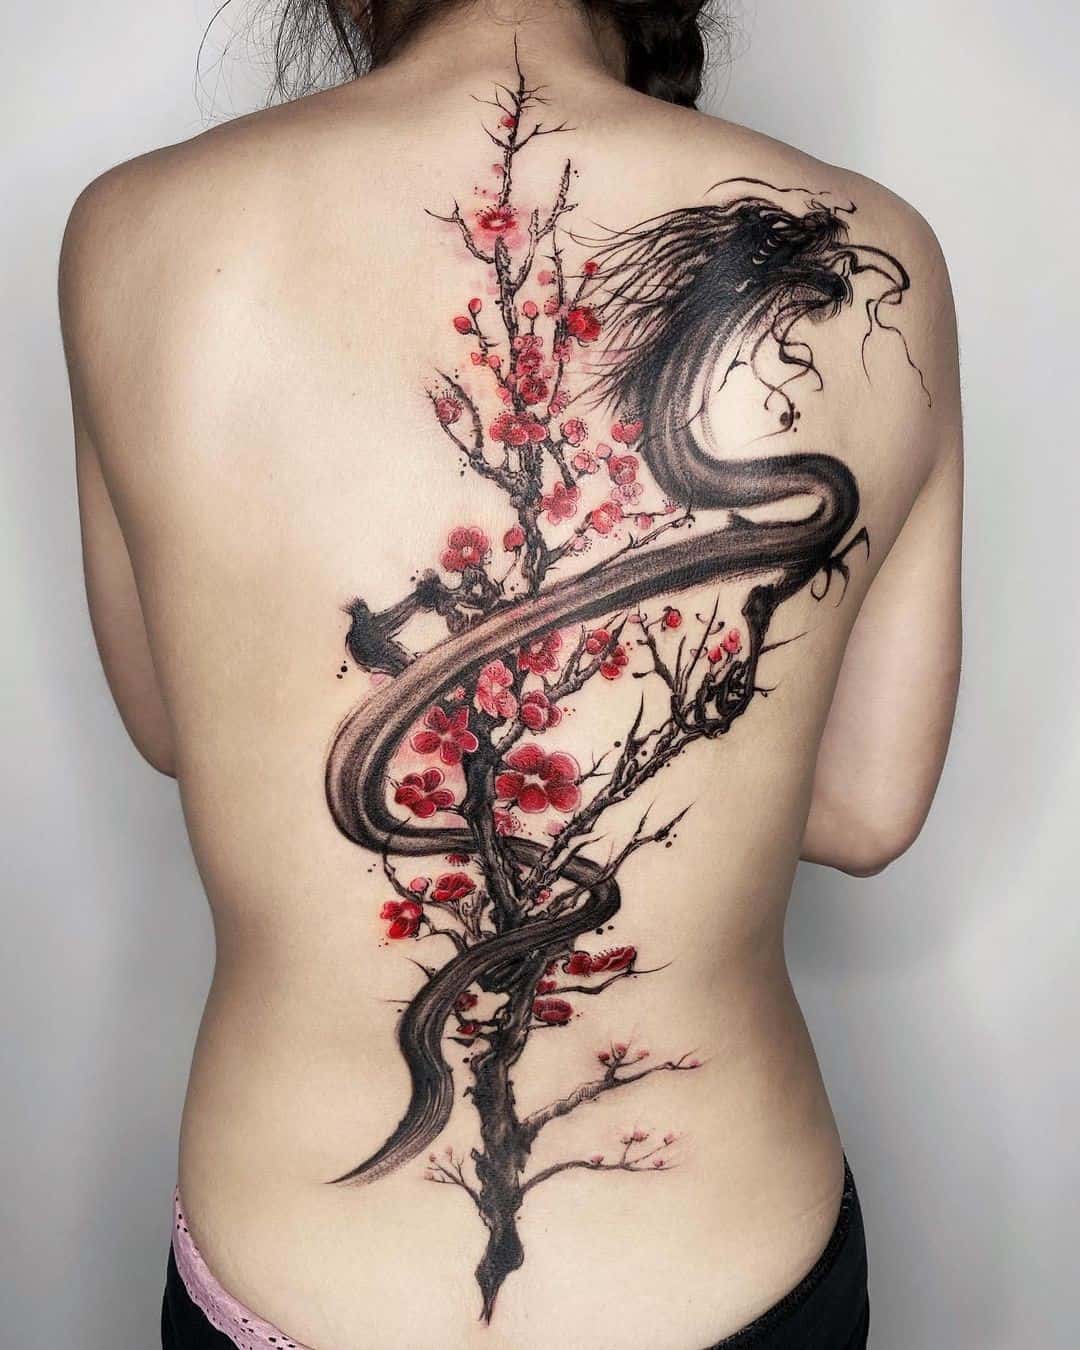 Why do people get tattoos of Chinese symbols? - Quora